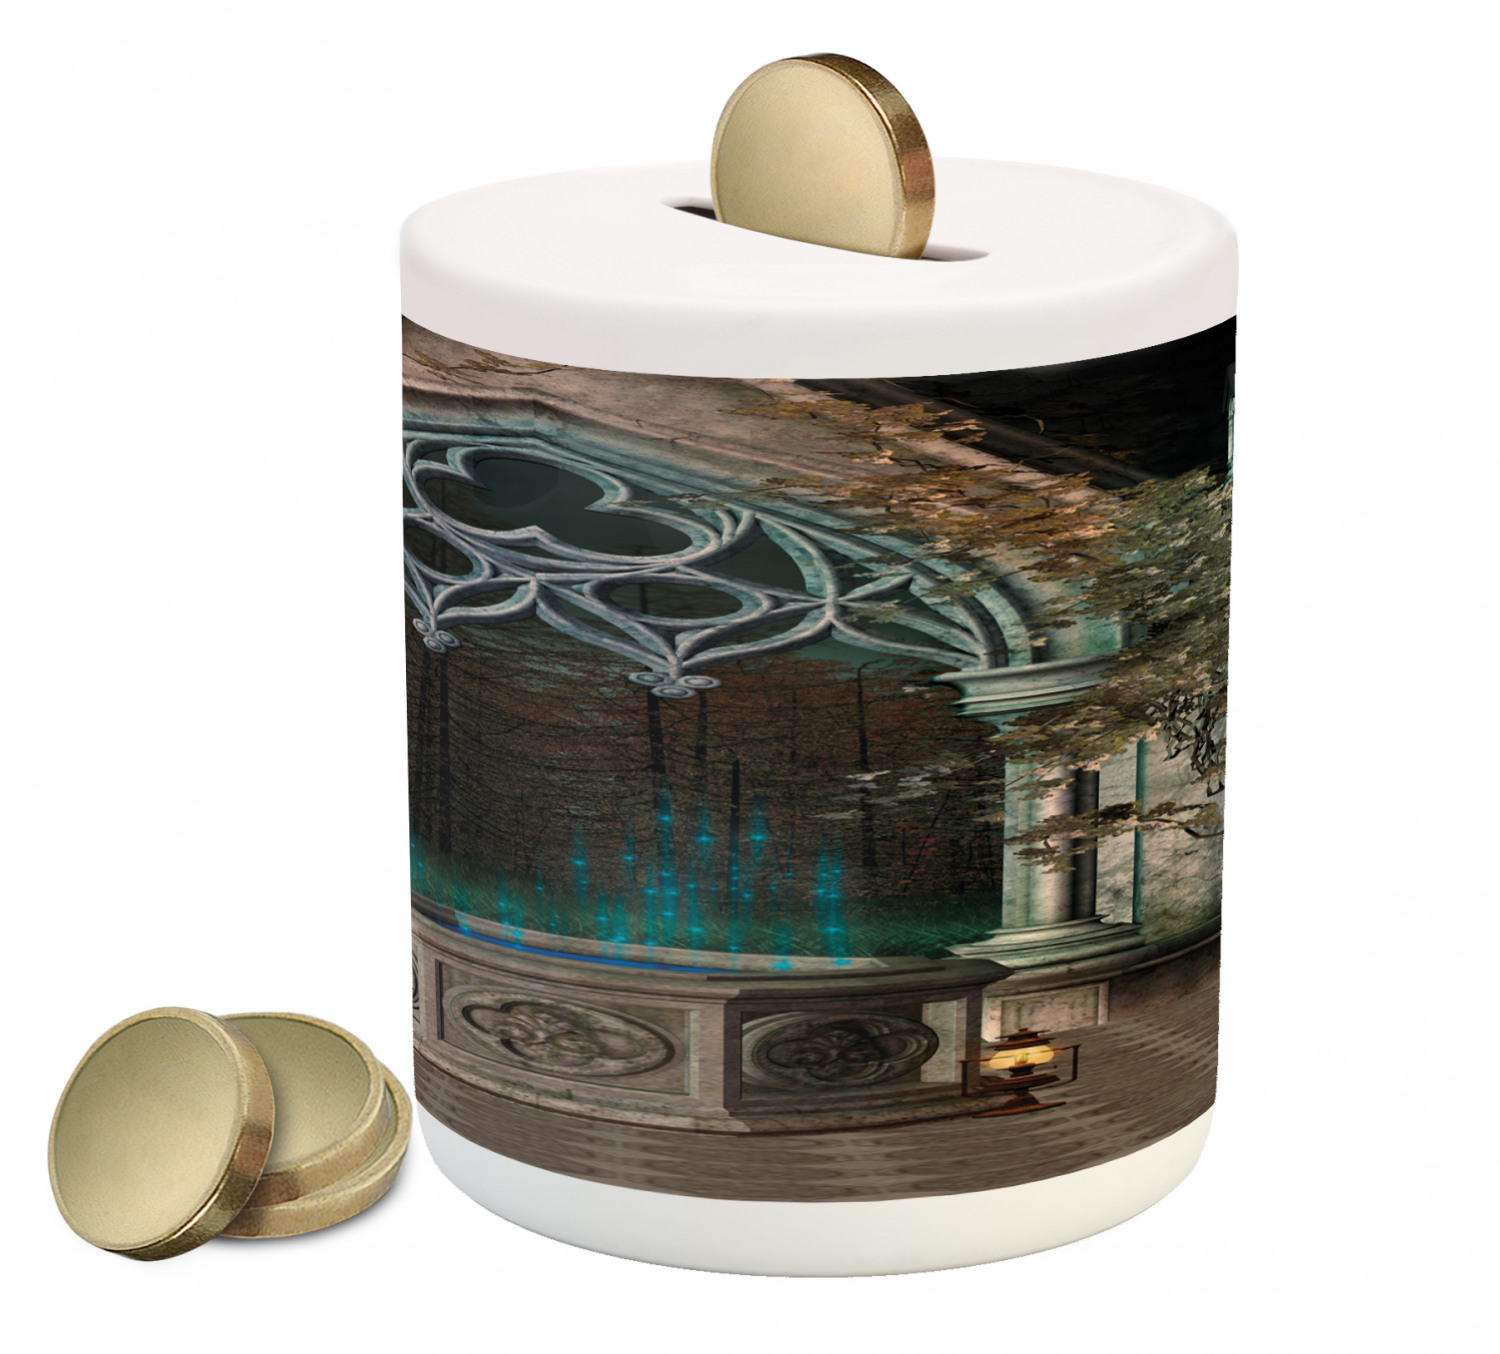 Gothic Piggy Bank, Patio with Enchanted Wishing Well Ivy on Antique Gateway to Forest, Ceramic Coin Bank Money Box for Cash Saving, 3.6" X 3.2", Grey Teal, by Ambesonne - image 1 of 4